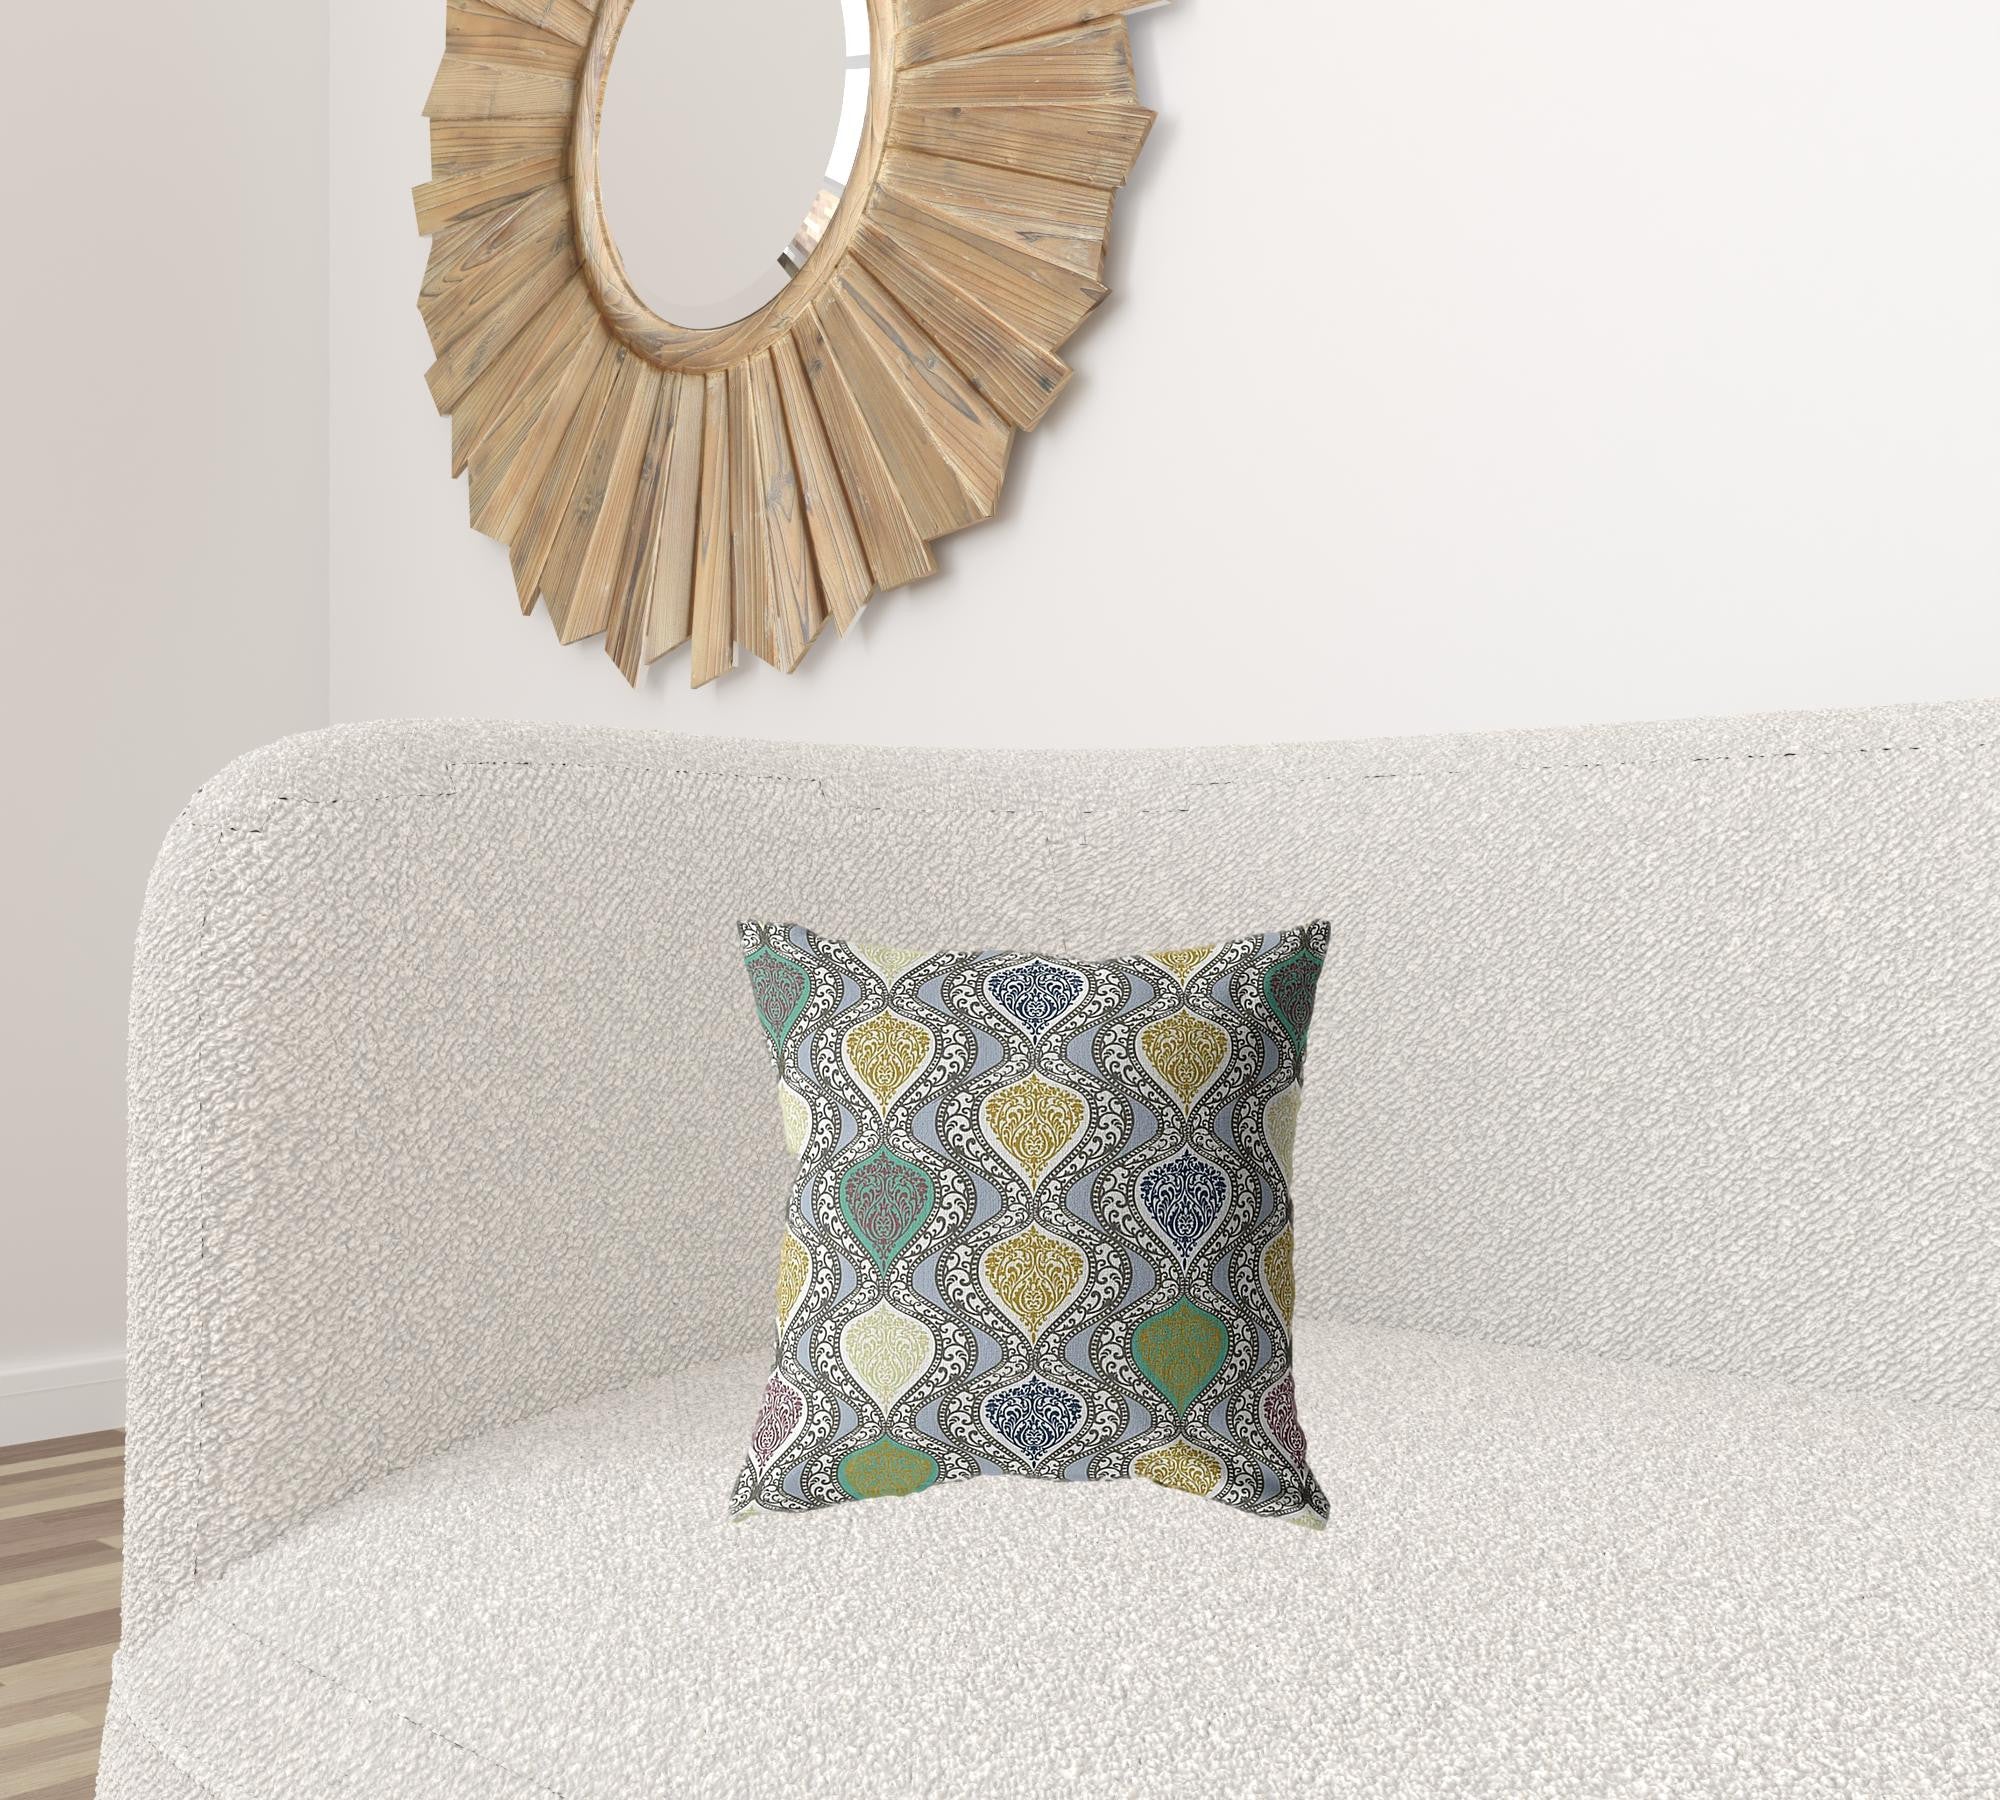 16” Gray Gold Ogee Zippered Suede Throw Pillow